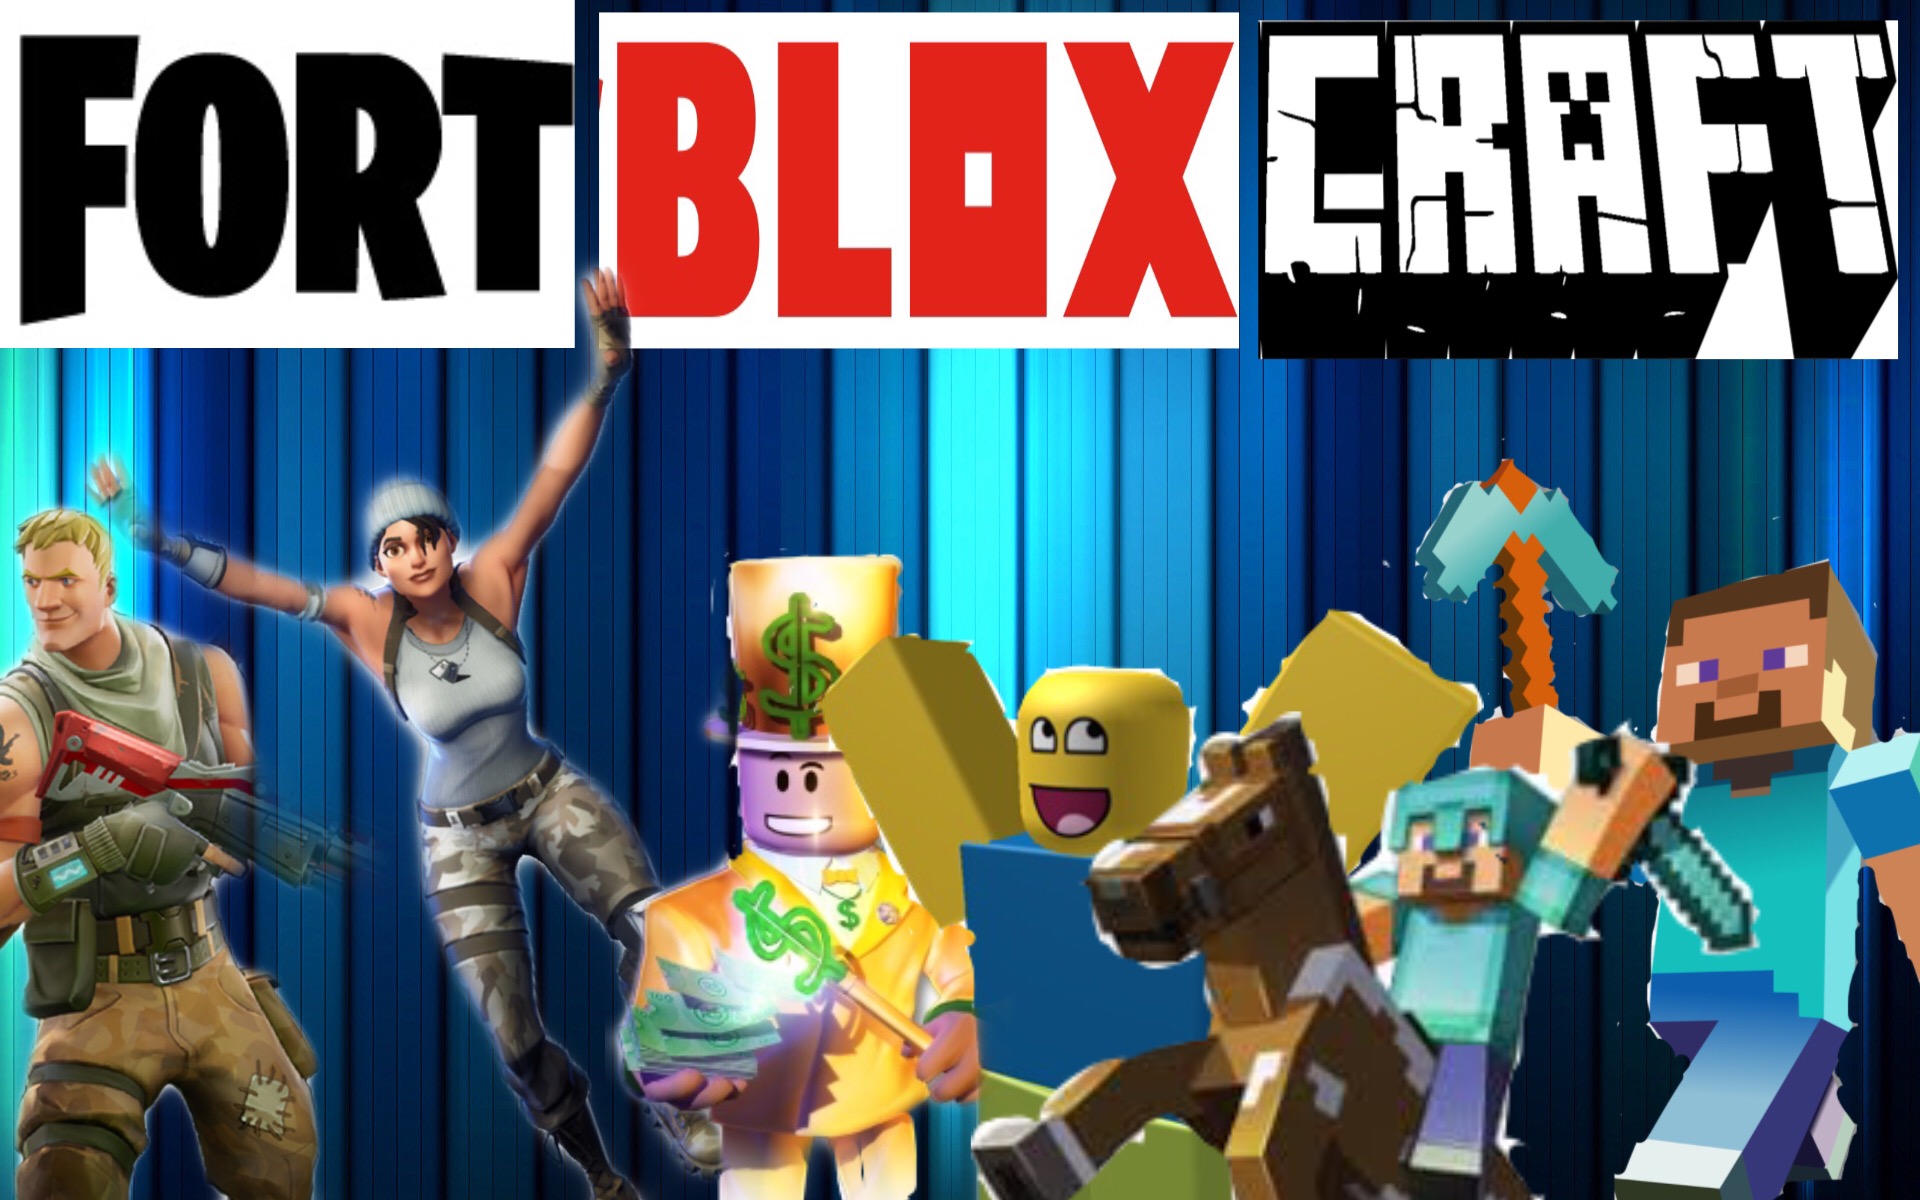 Fortnite Roblox Image By Adriennemont - fortnite pictures roblox